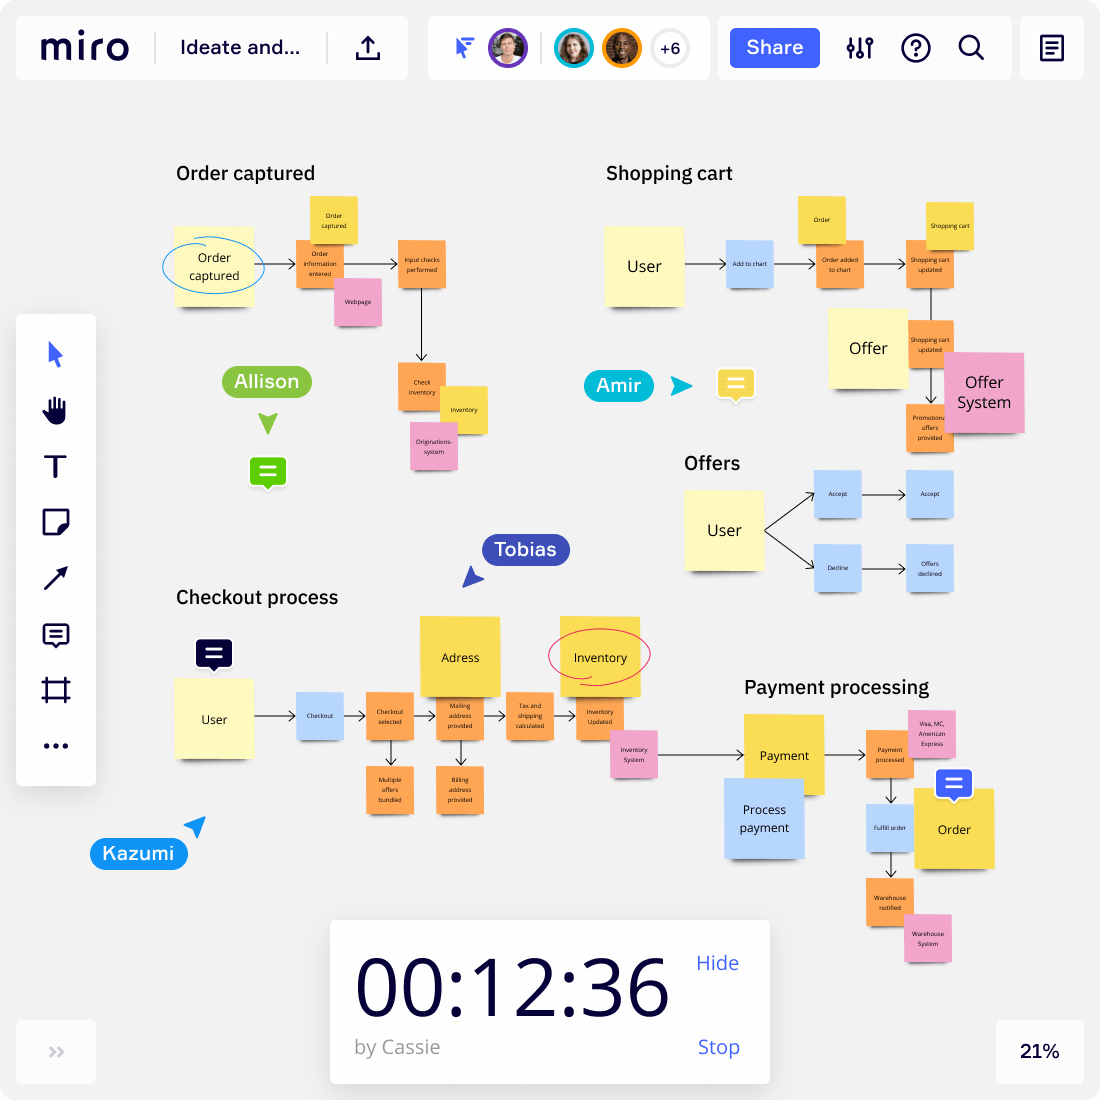 skrubbe Hare fjerkræ Online Sticky Notes for Virtual Collaboration | Miro